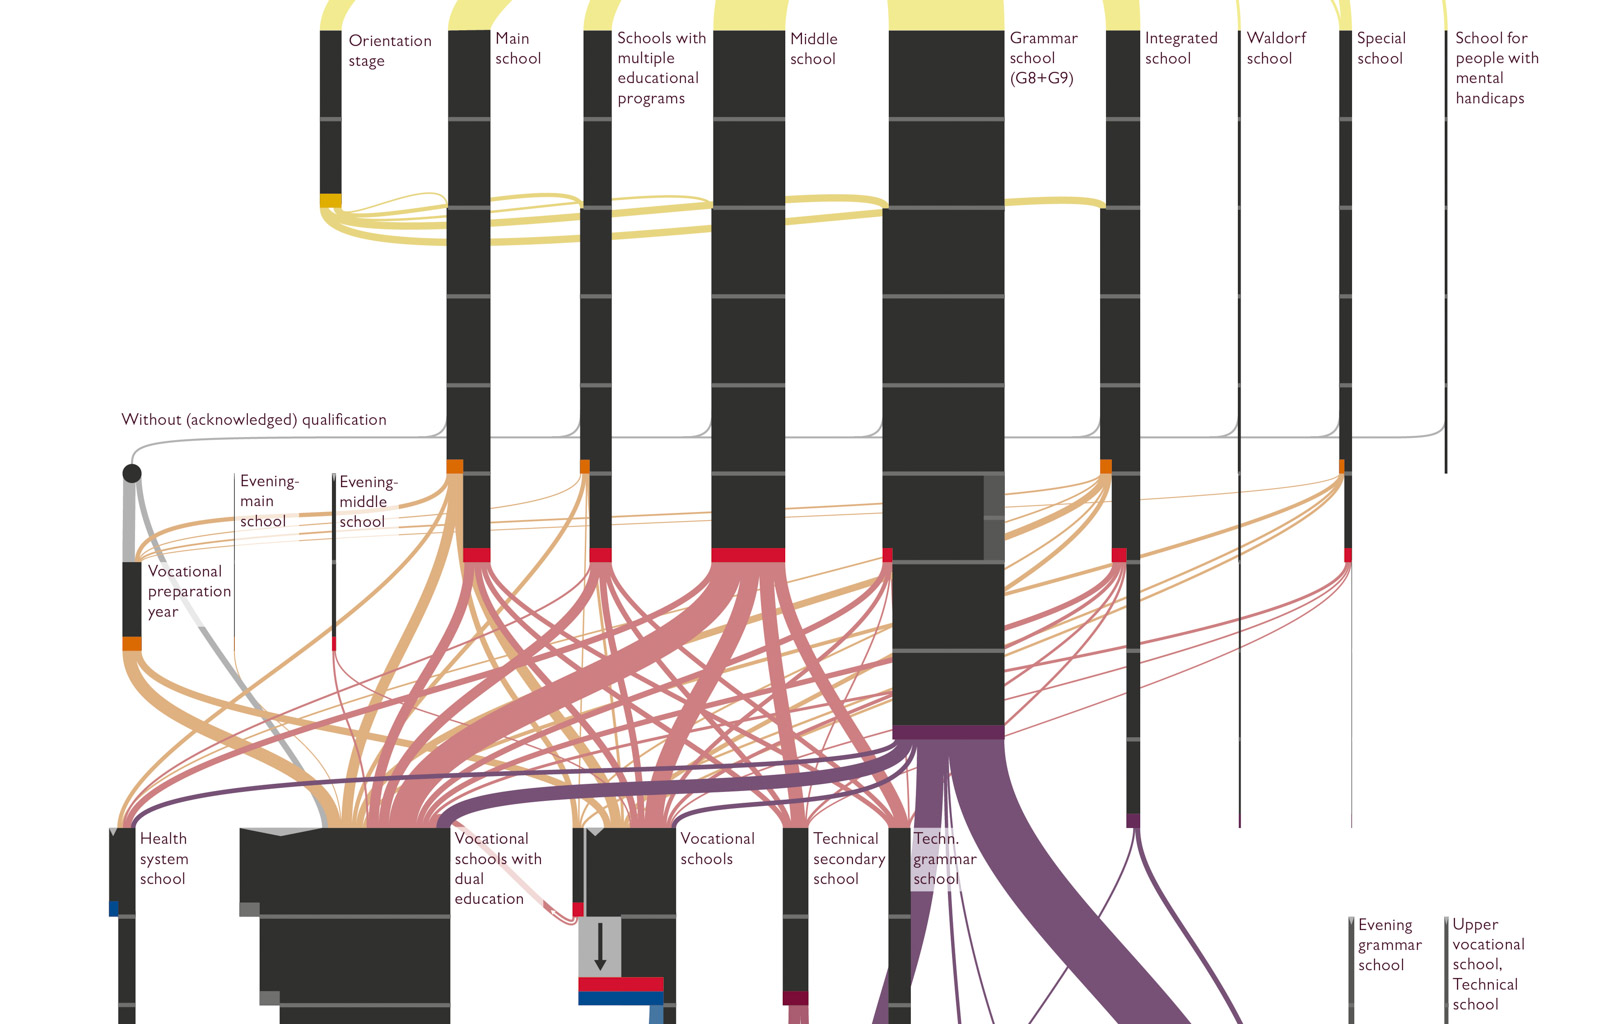 detail of the infographic, many details and connections can be seen